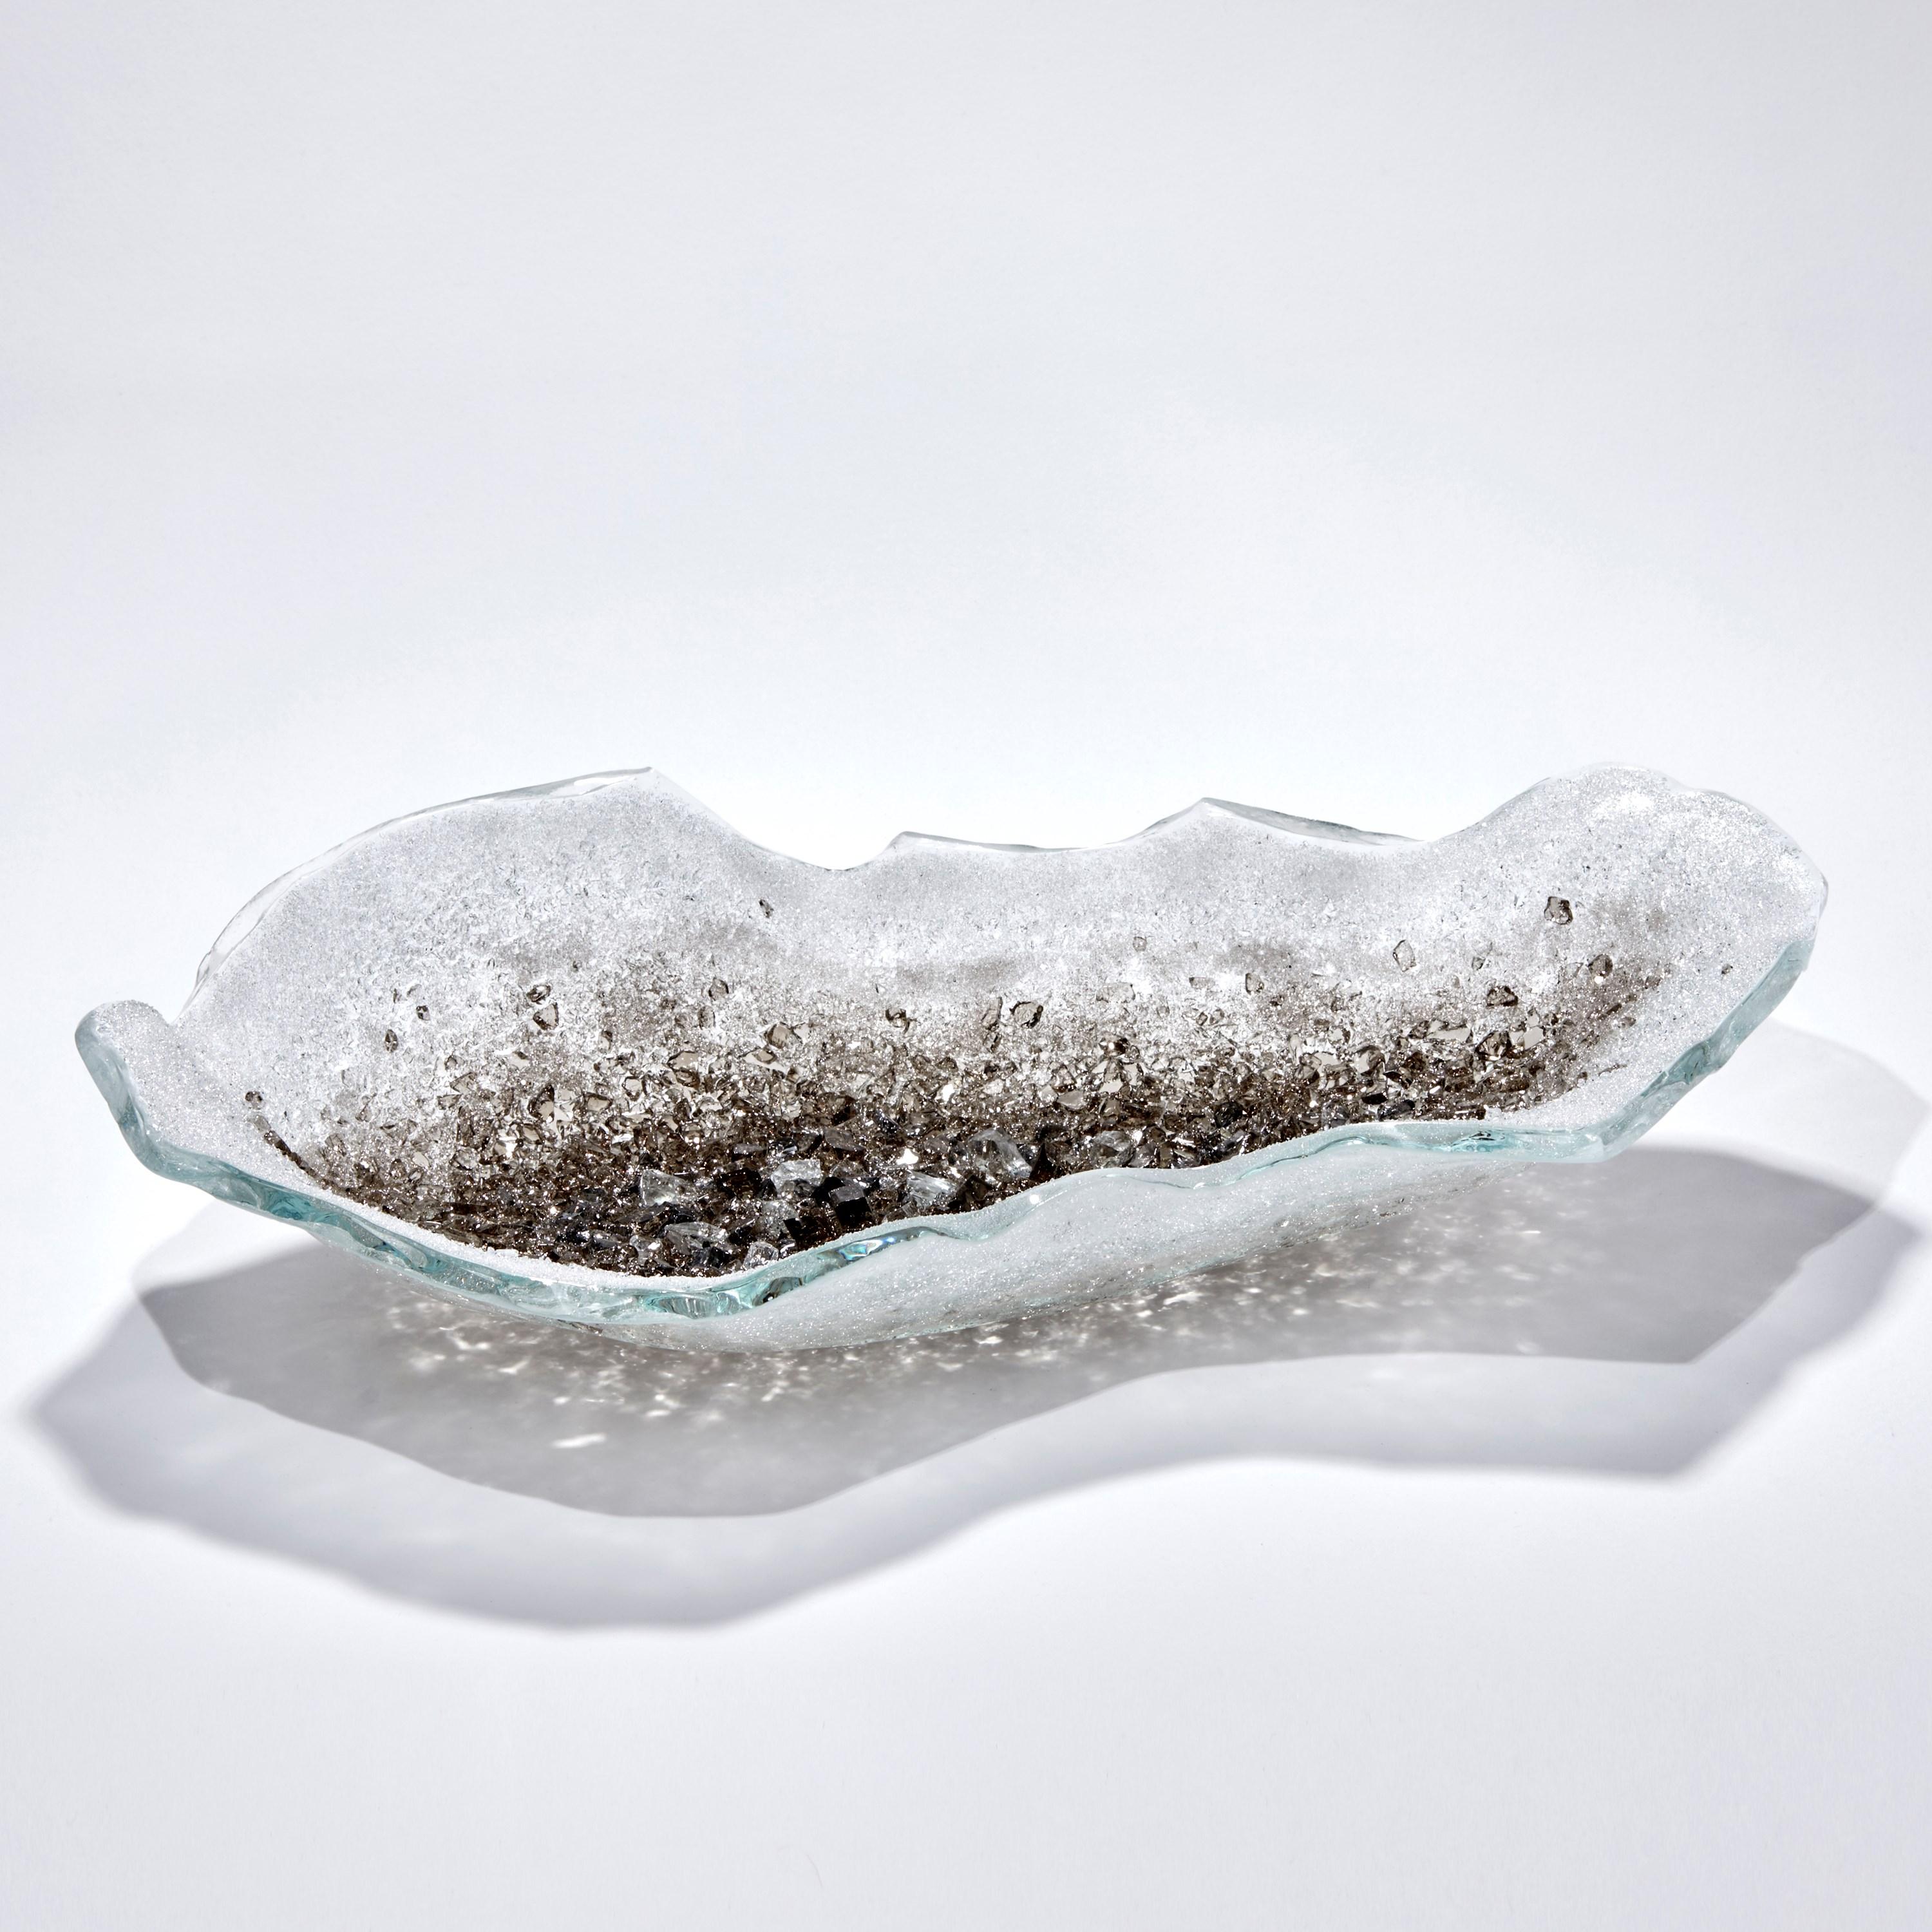 'Celestine VI' is a unique glass sculptural centrepiece by the British artist Wayne Charmer.

For Wayne Charmer, the fascination of glass is to exploit its translucent and reflective qualities. Inspired by nature, his signature techniques for his